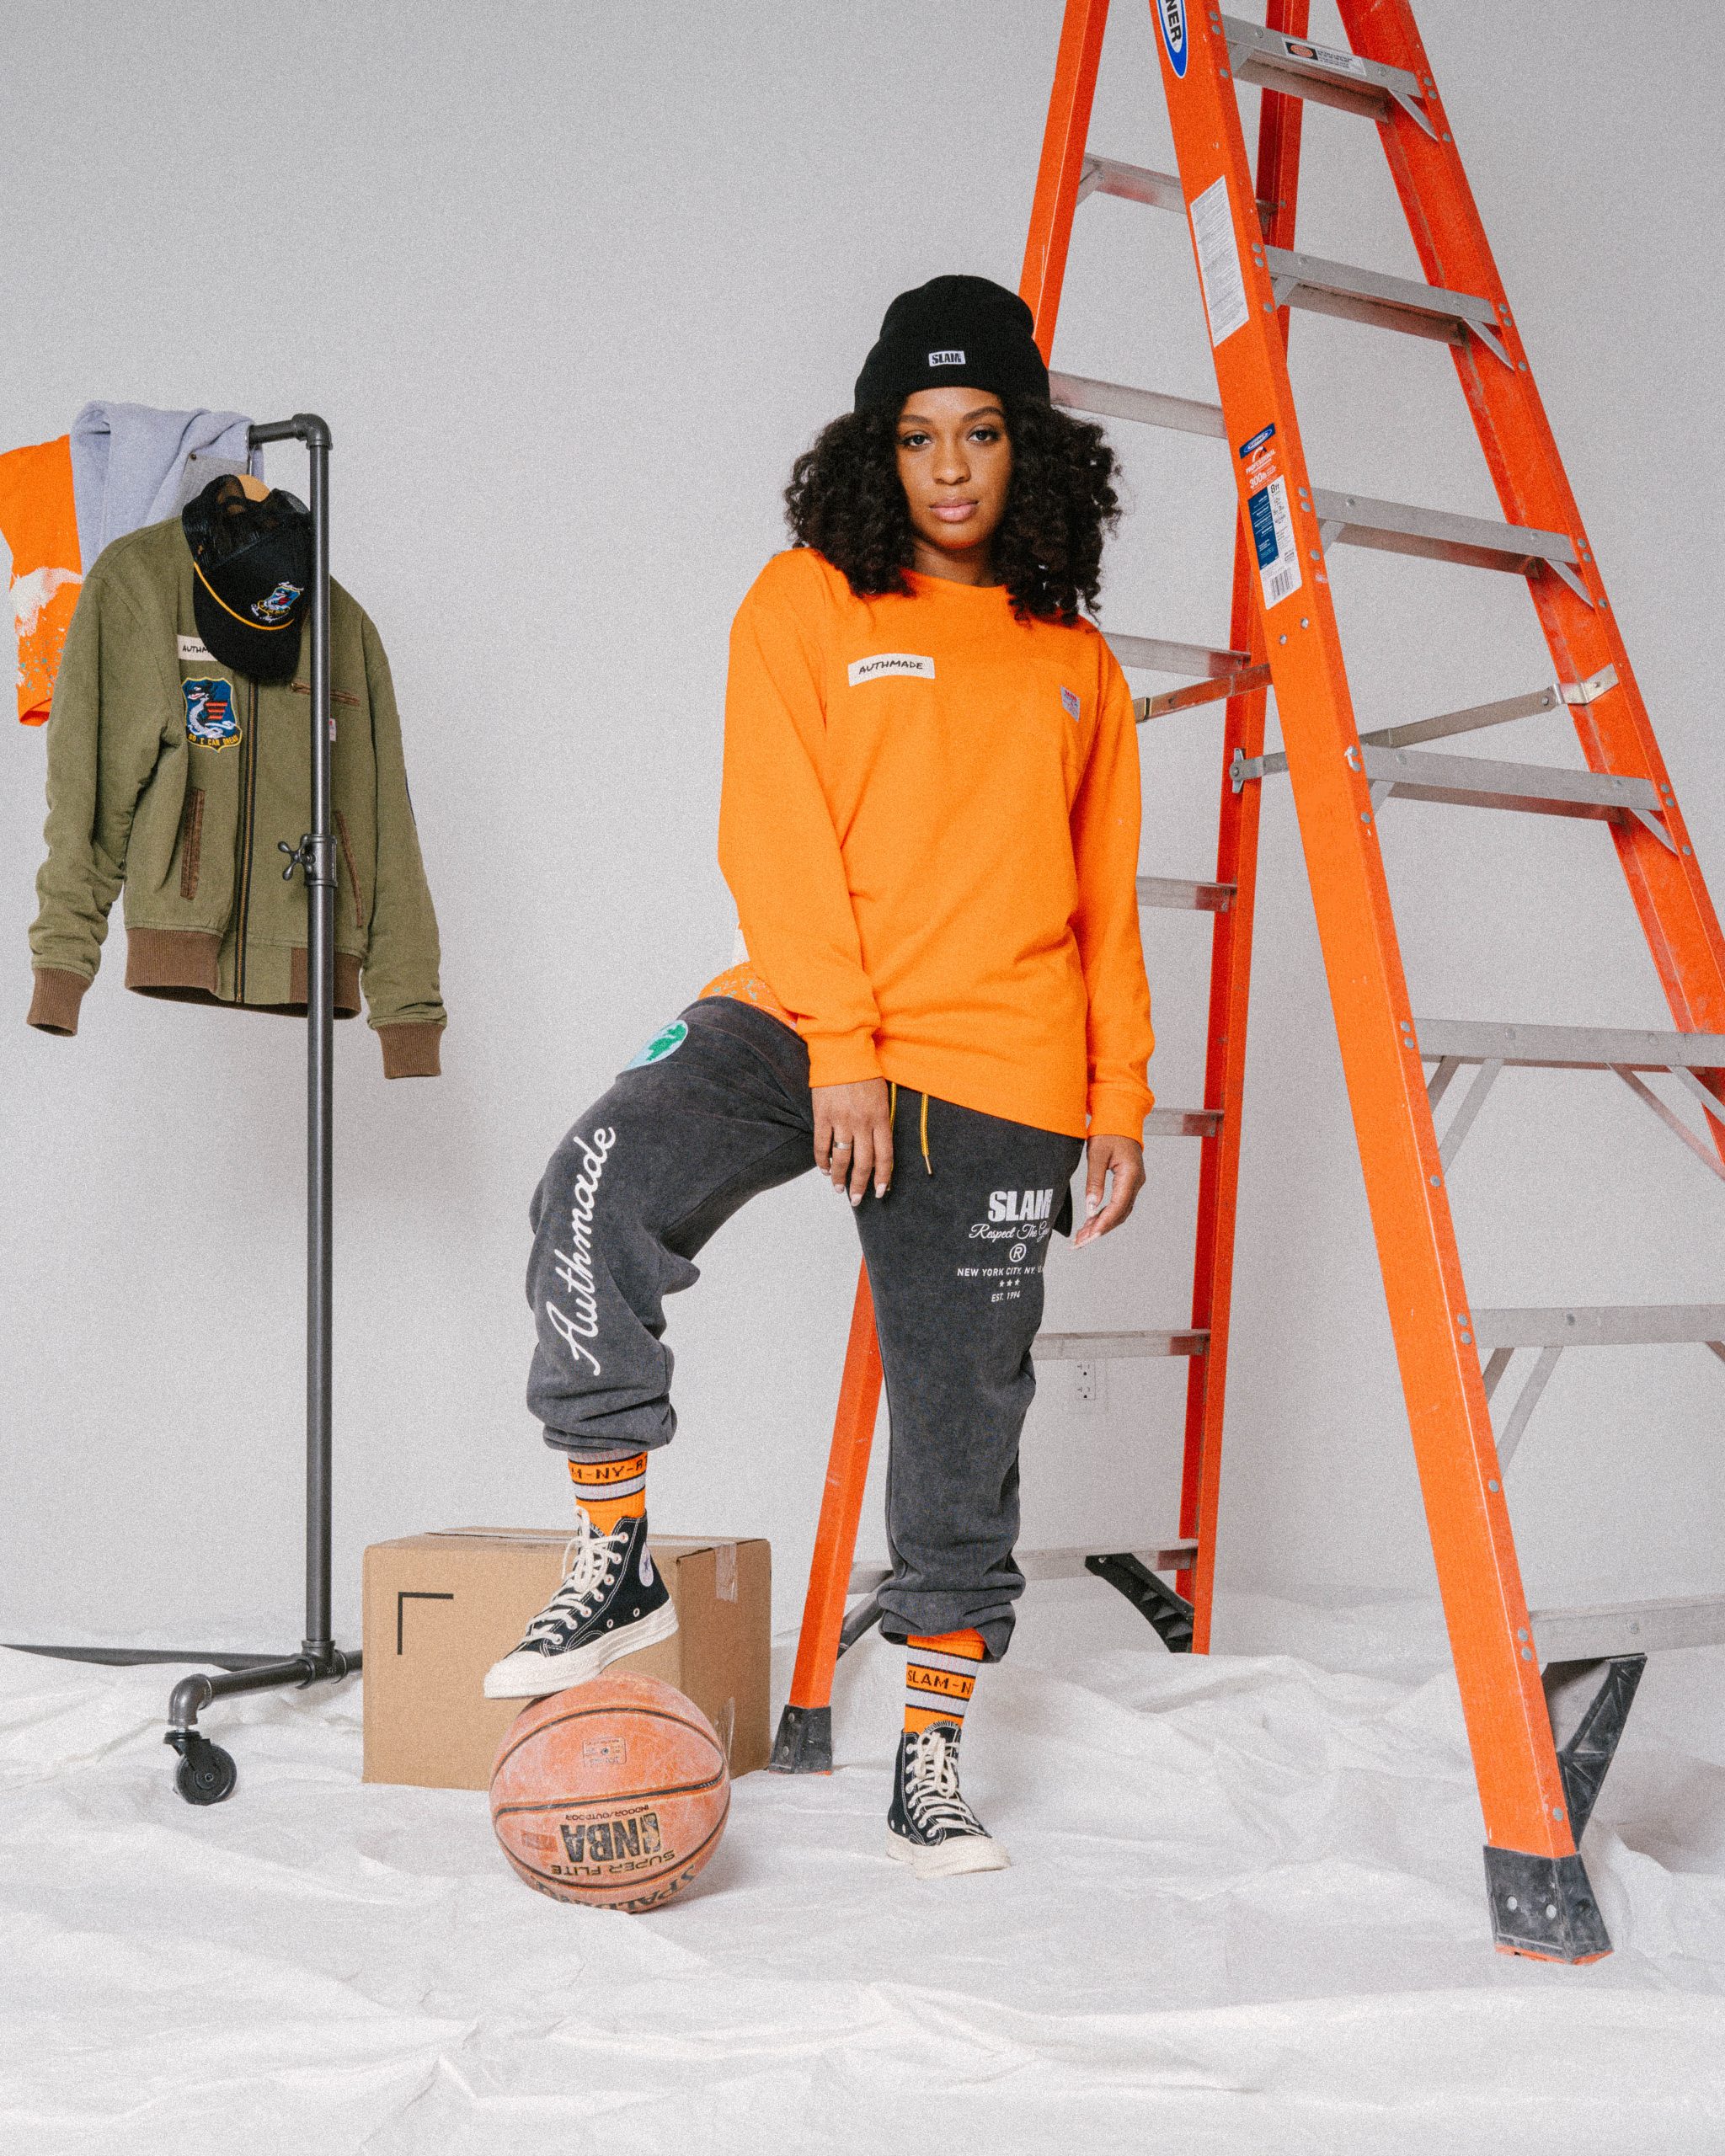 The SLAM x AUTHMADE ‘So I Can Dream’ Collection Pays Homage to Generational Sacrifices and the Spirit of the Game